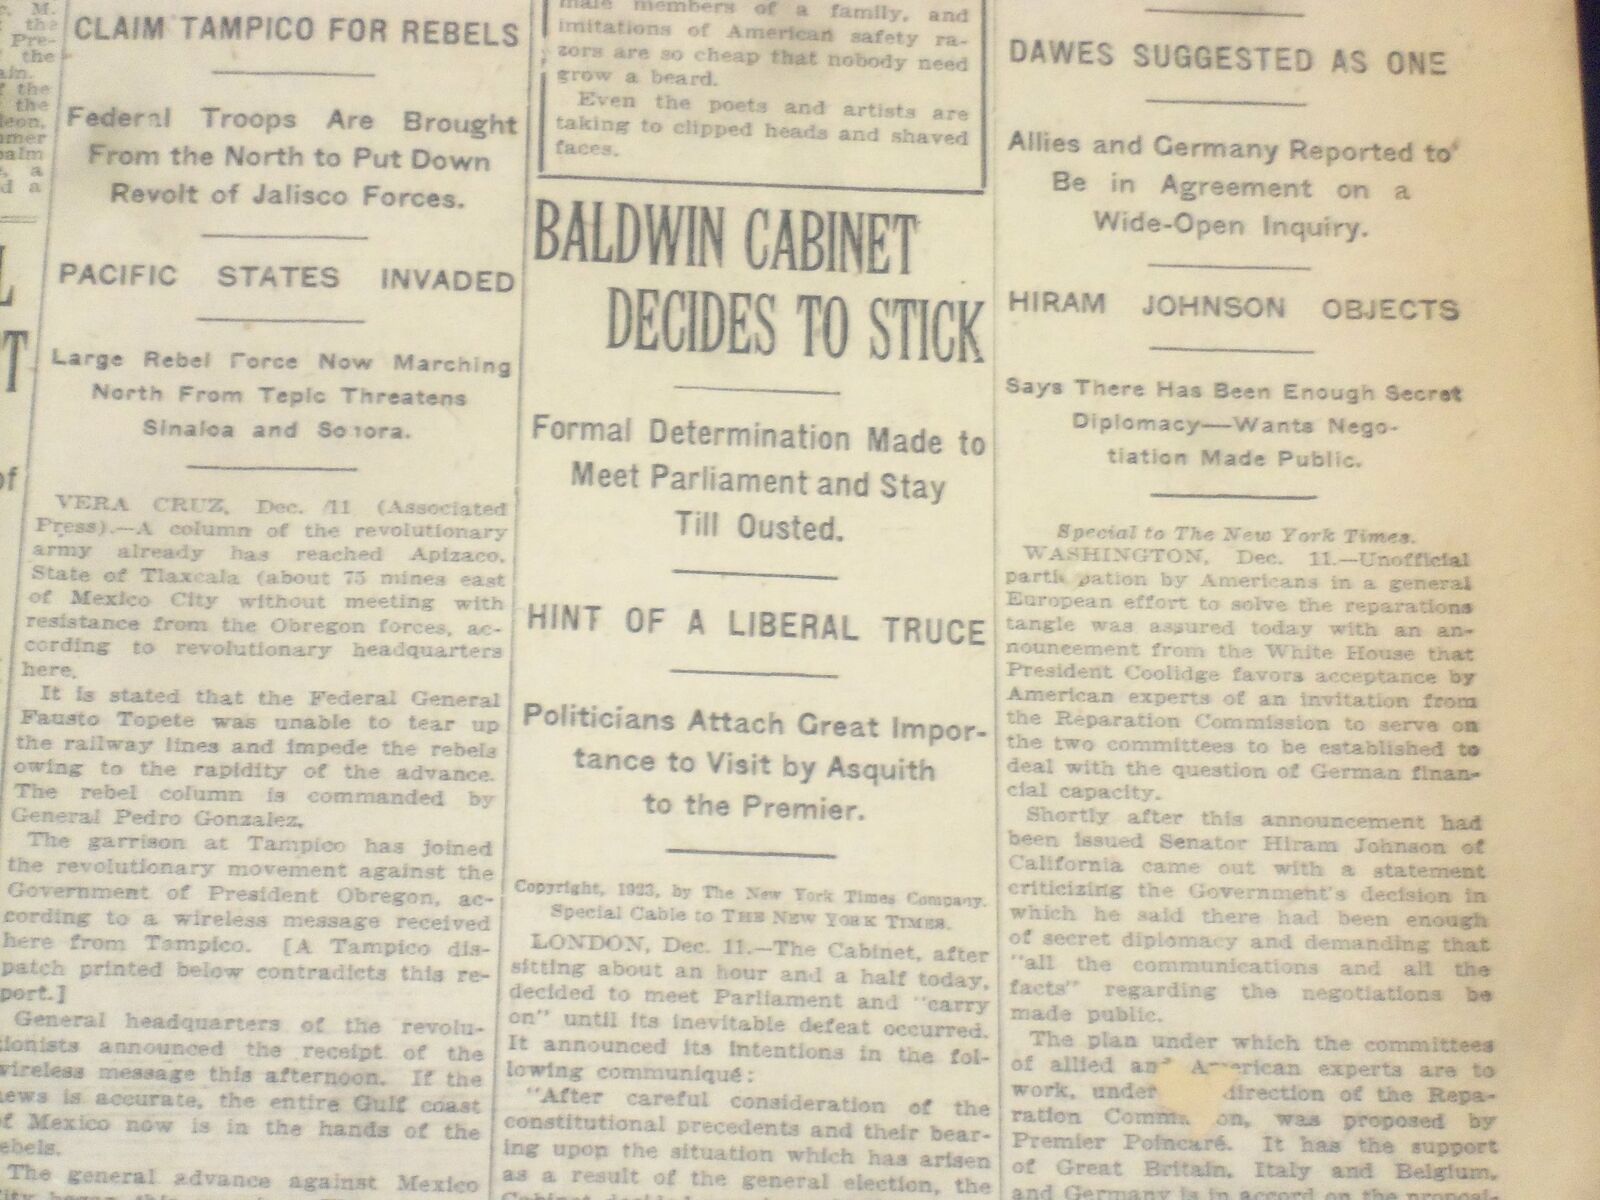 1923 DECEMBER 12 NEW YORK TIMES - BALDWIN CABINET DECIDES TO STICK - NT 9220